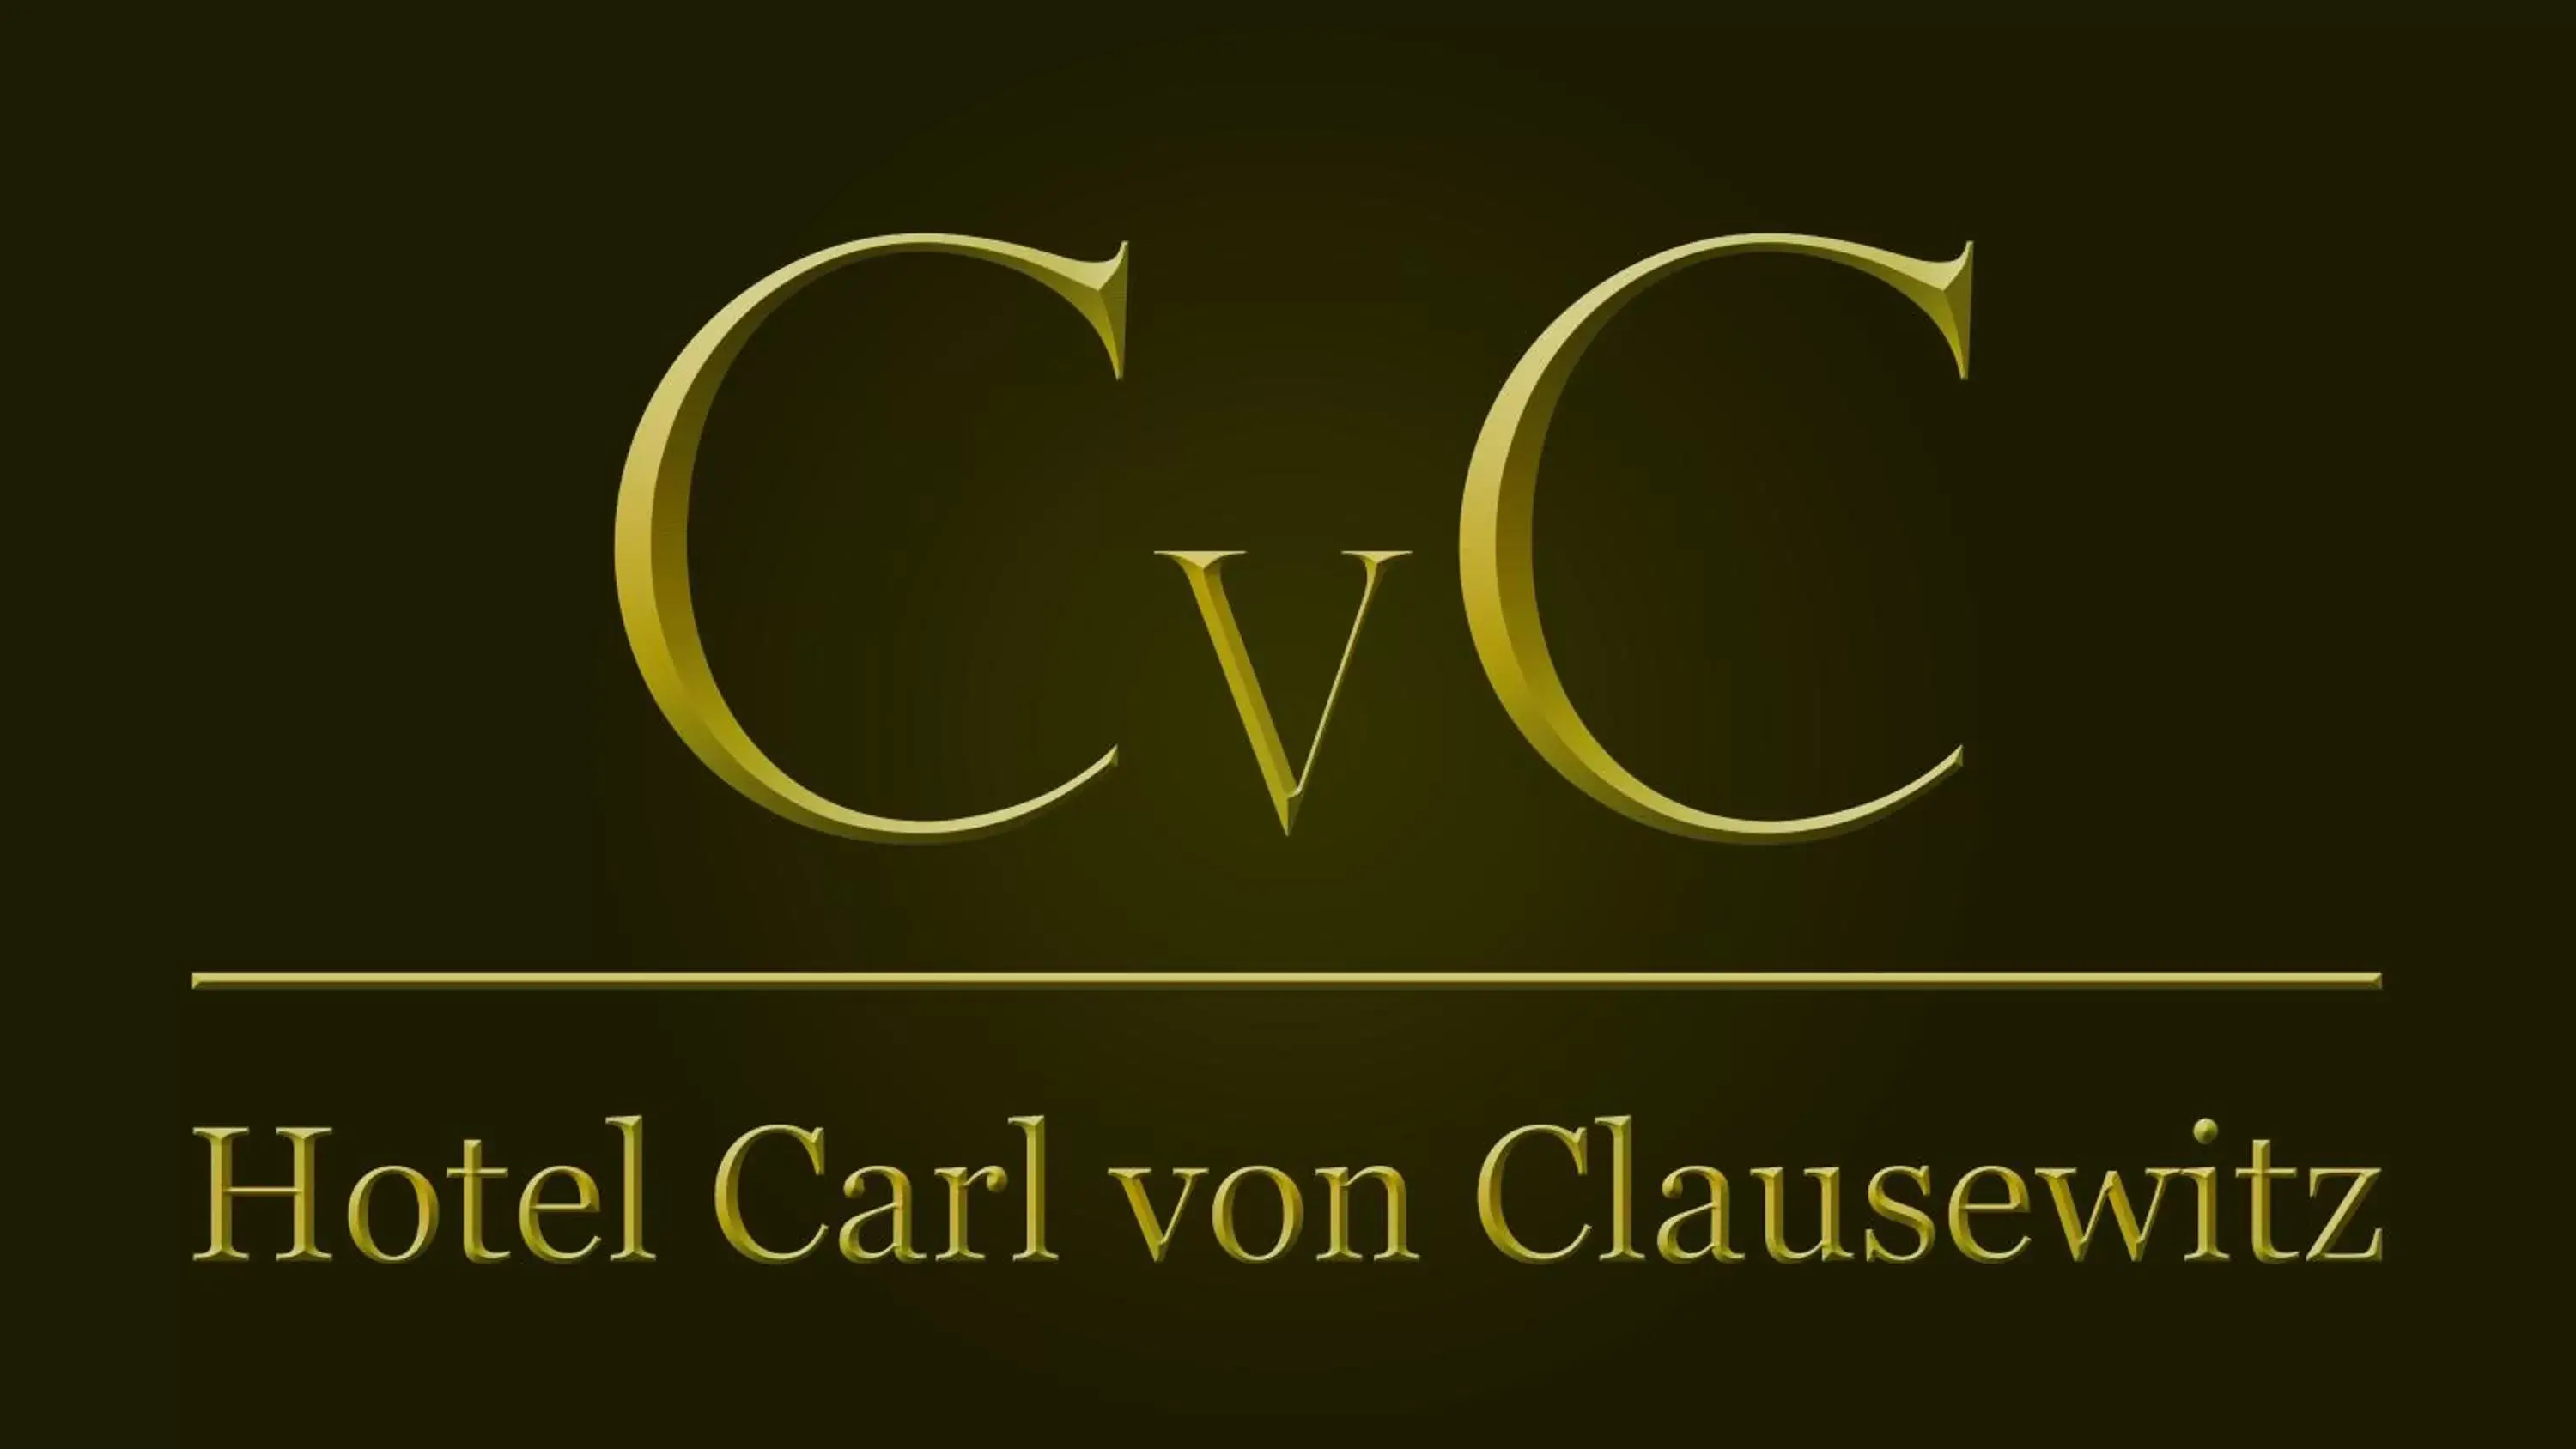 Property logo or sign, Property Logo/Sign in Hotel Carl von Clausewitz